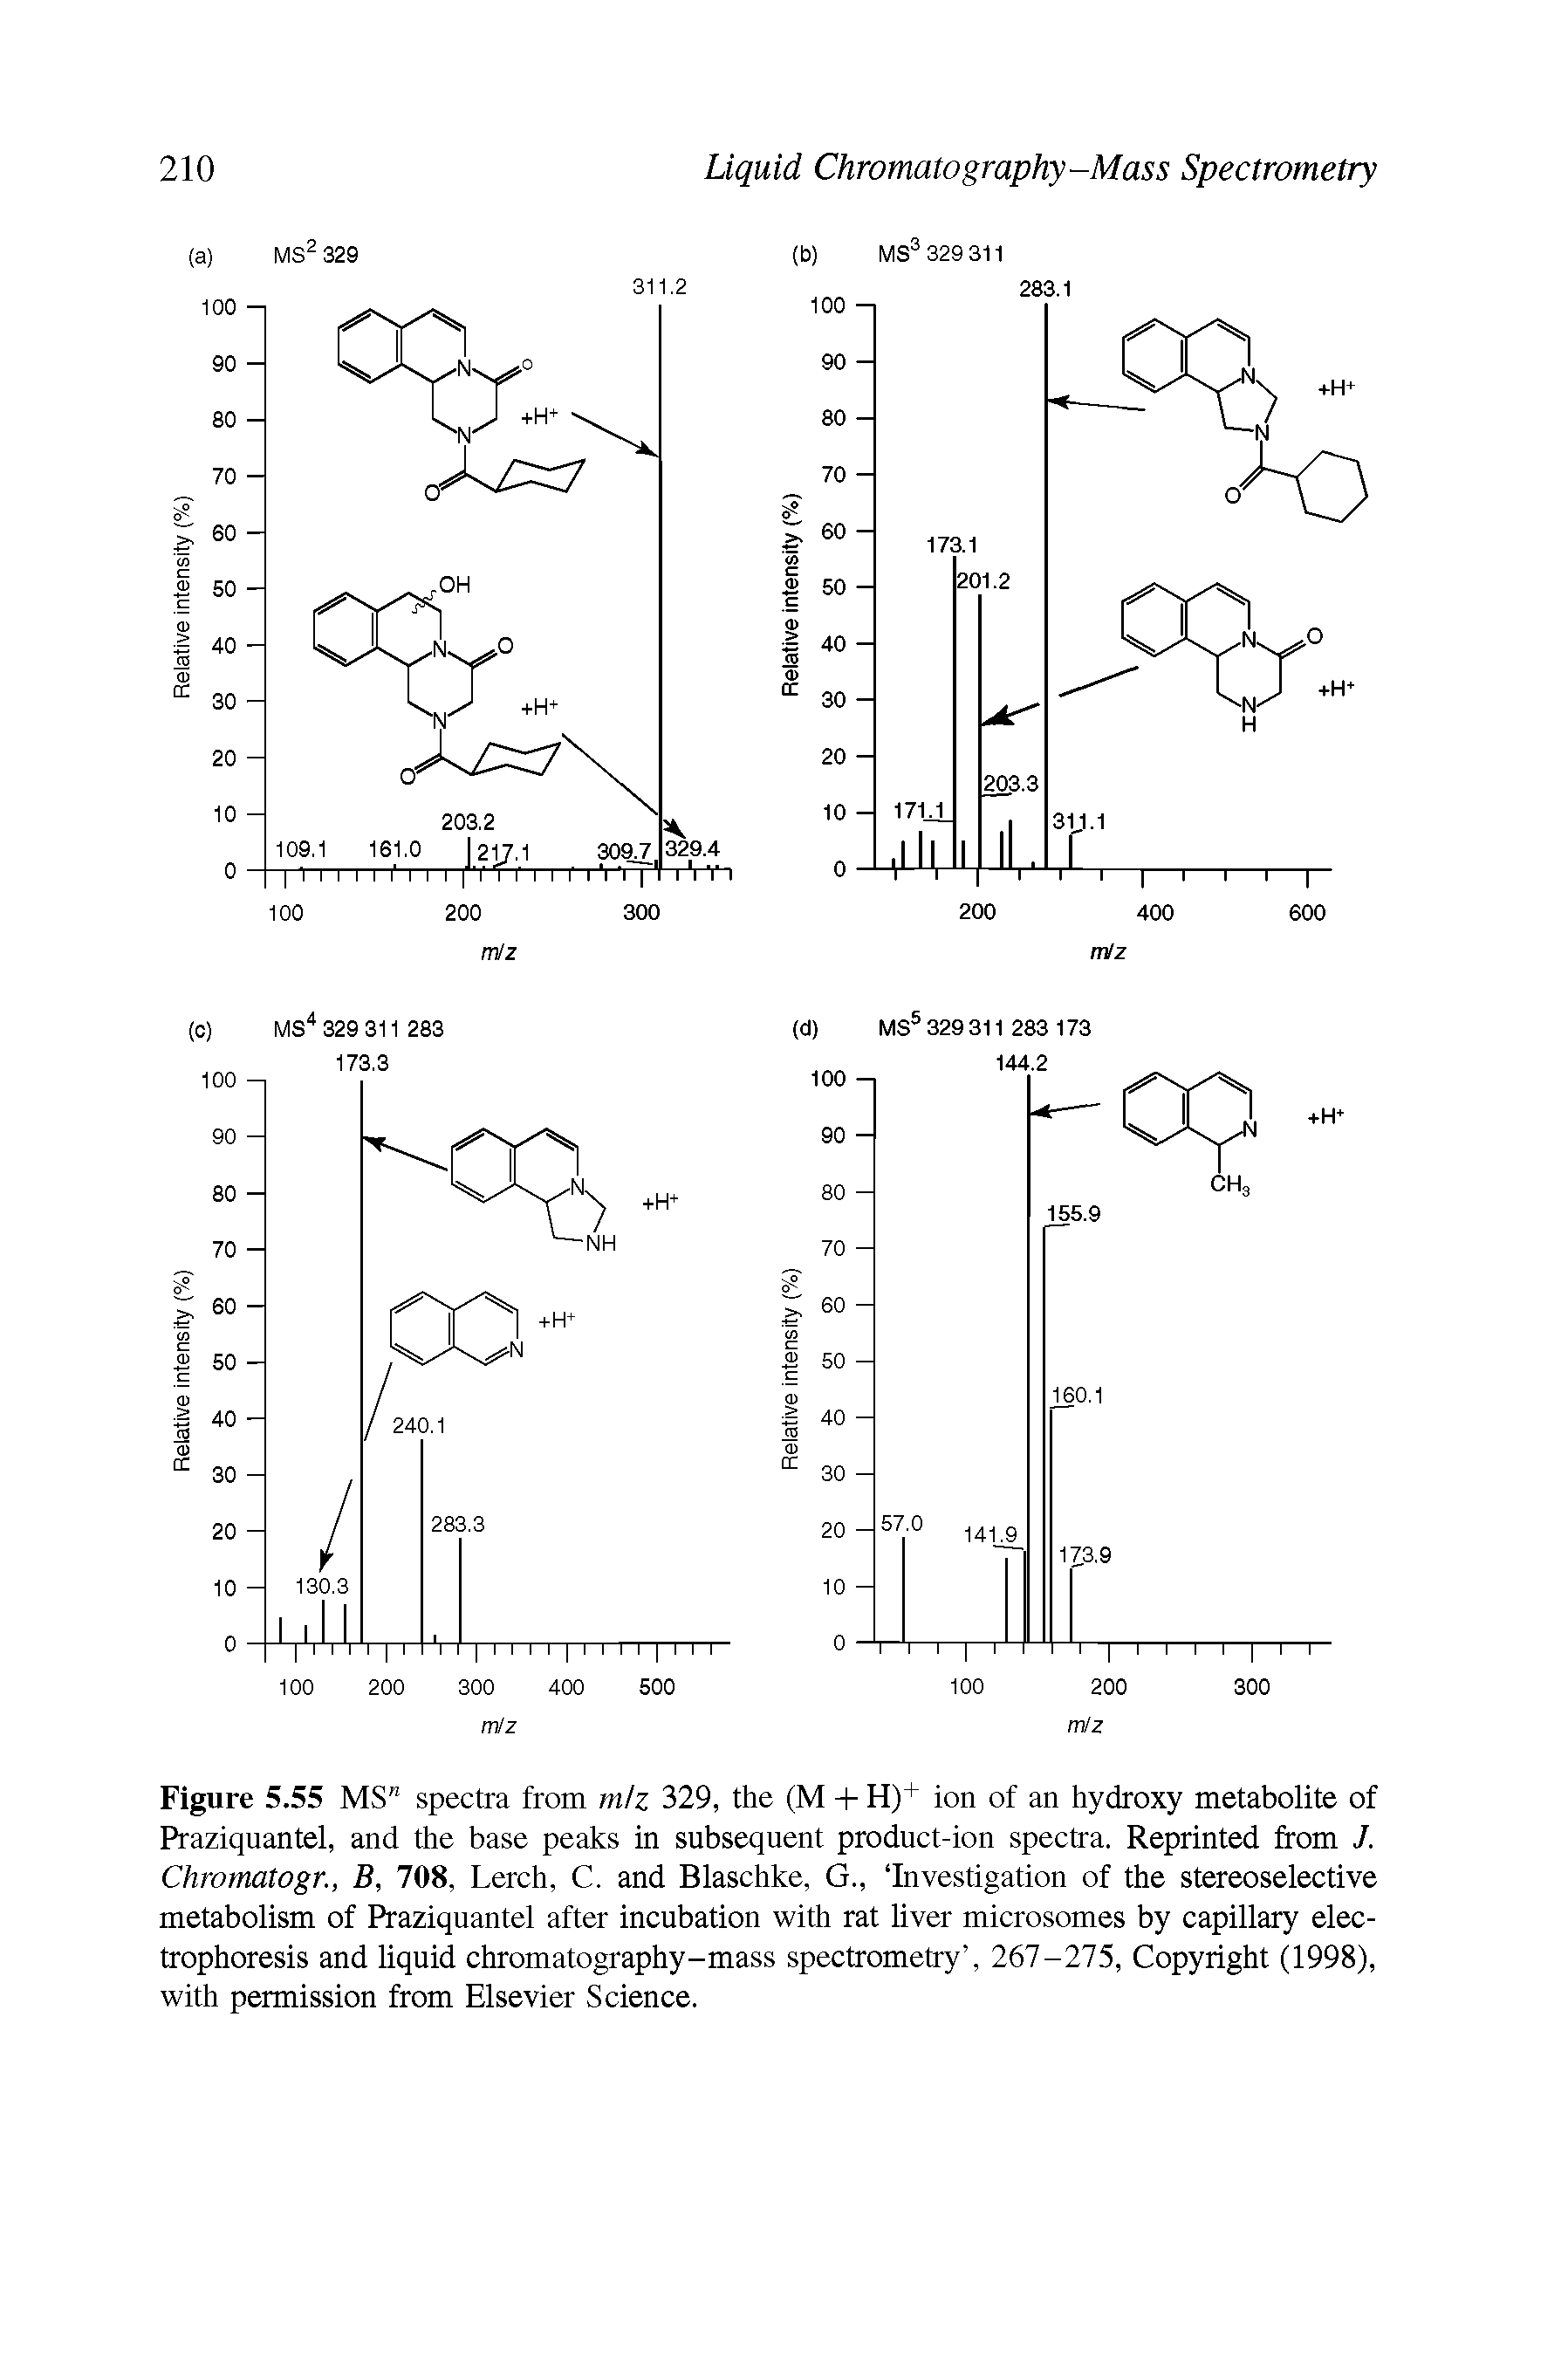 Figure 5.55 MS" spectra from rntz 329, the (M + H)+ ion of an hydroxy metabolite of Praziquantel, and the base peaks in subsequent product-ion spectra. Reprinted from J. Chromatogr., B, 708, Lerch, C. and Blaschke, G., Investigation of the stereoselective metabolism of Praziquantel after incubation with rat liver microsomes by capillary electrophoresis and liquid chromatography-mass spectrometry , 267-275, Copyright (1998), with permission from Elsevier Science.